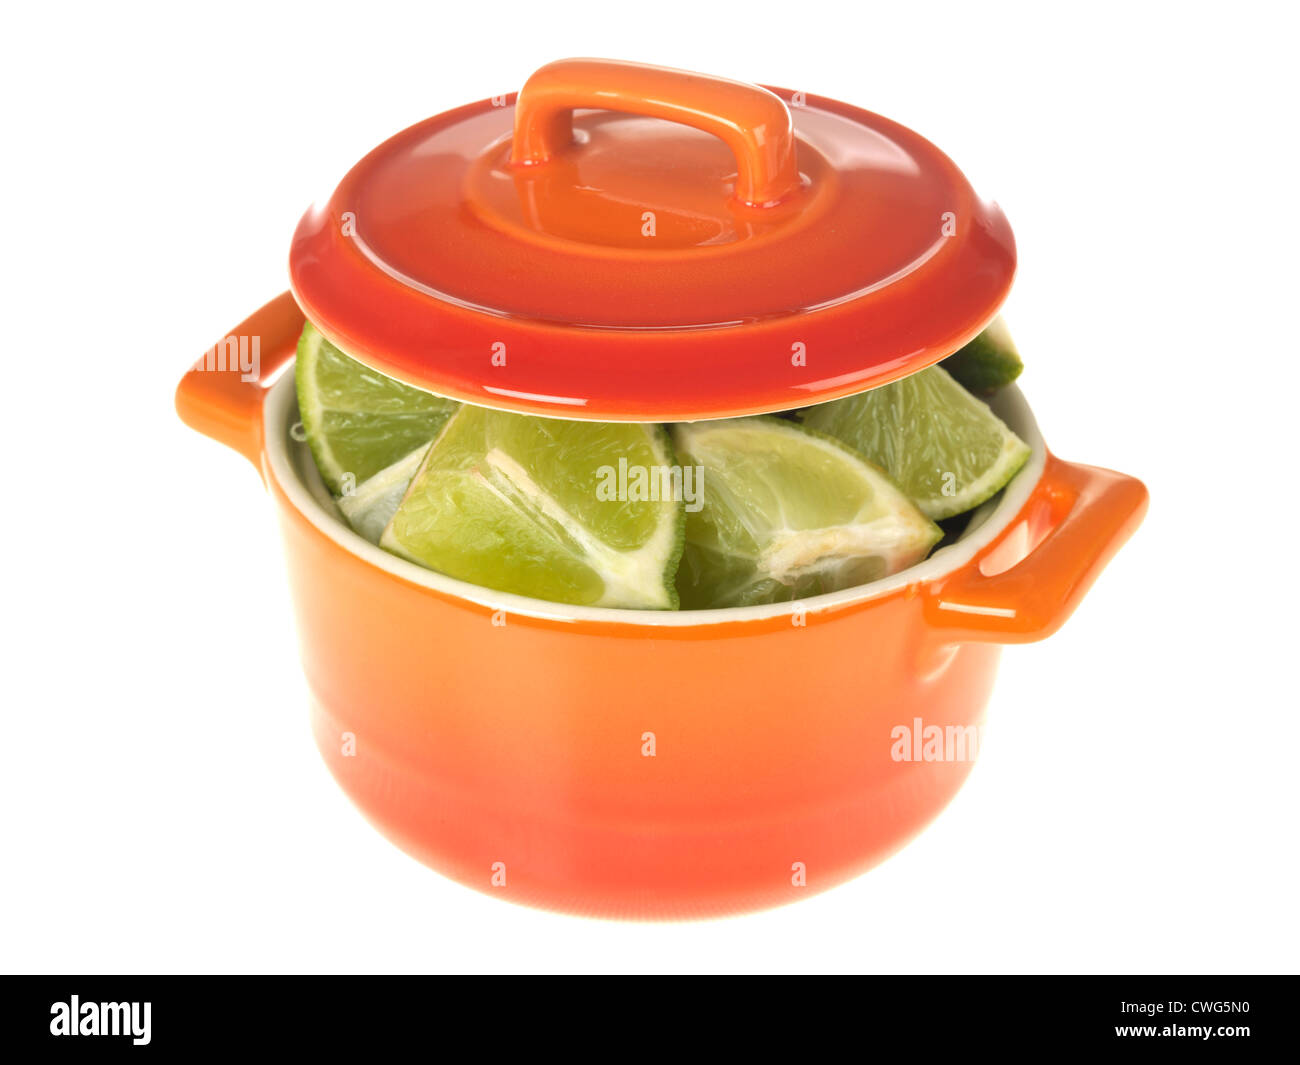 Colourful Orange Pot, Filled With Freshly Cut Ripe Green Limes Against White Background, With Clipping Path And No People Stock Photo - Alamy